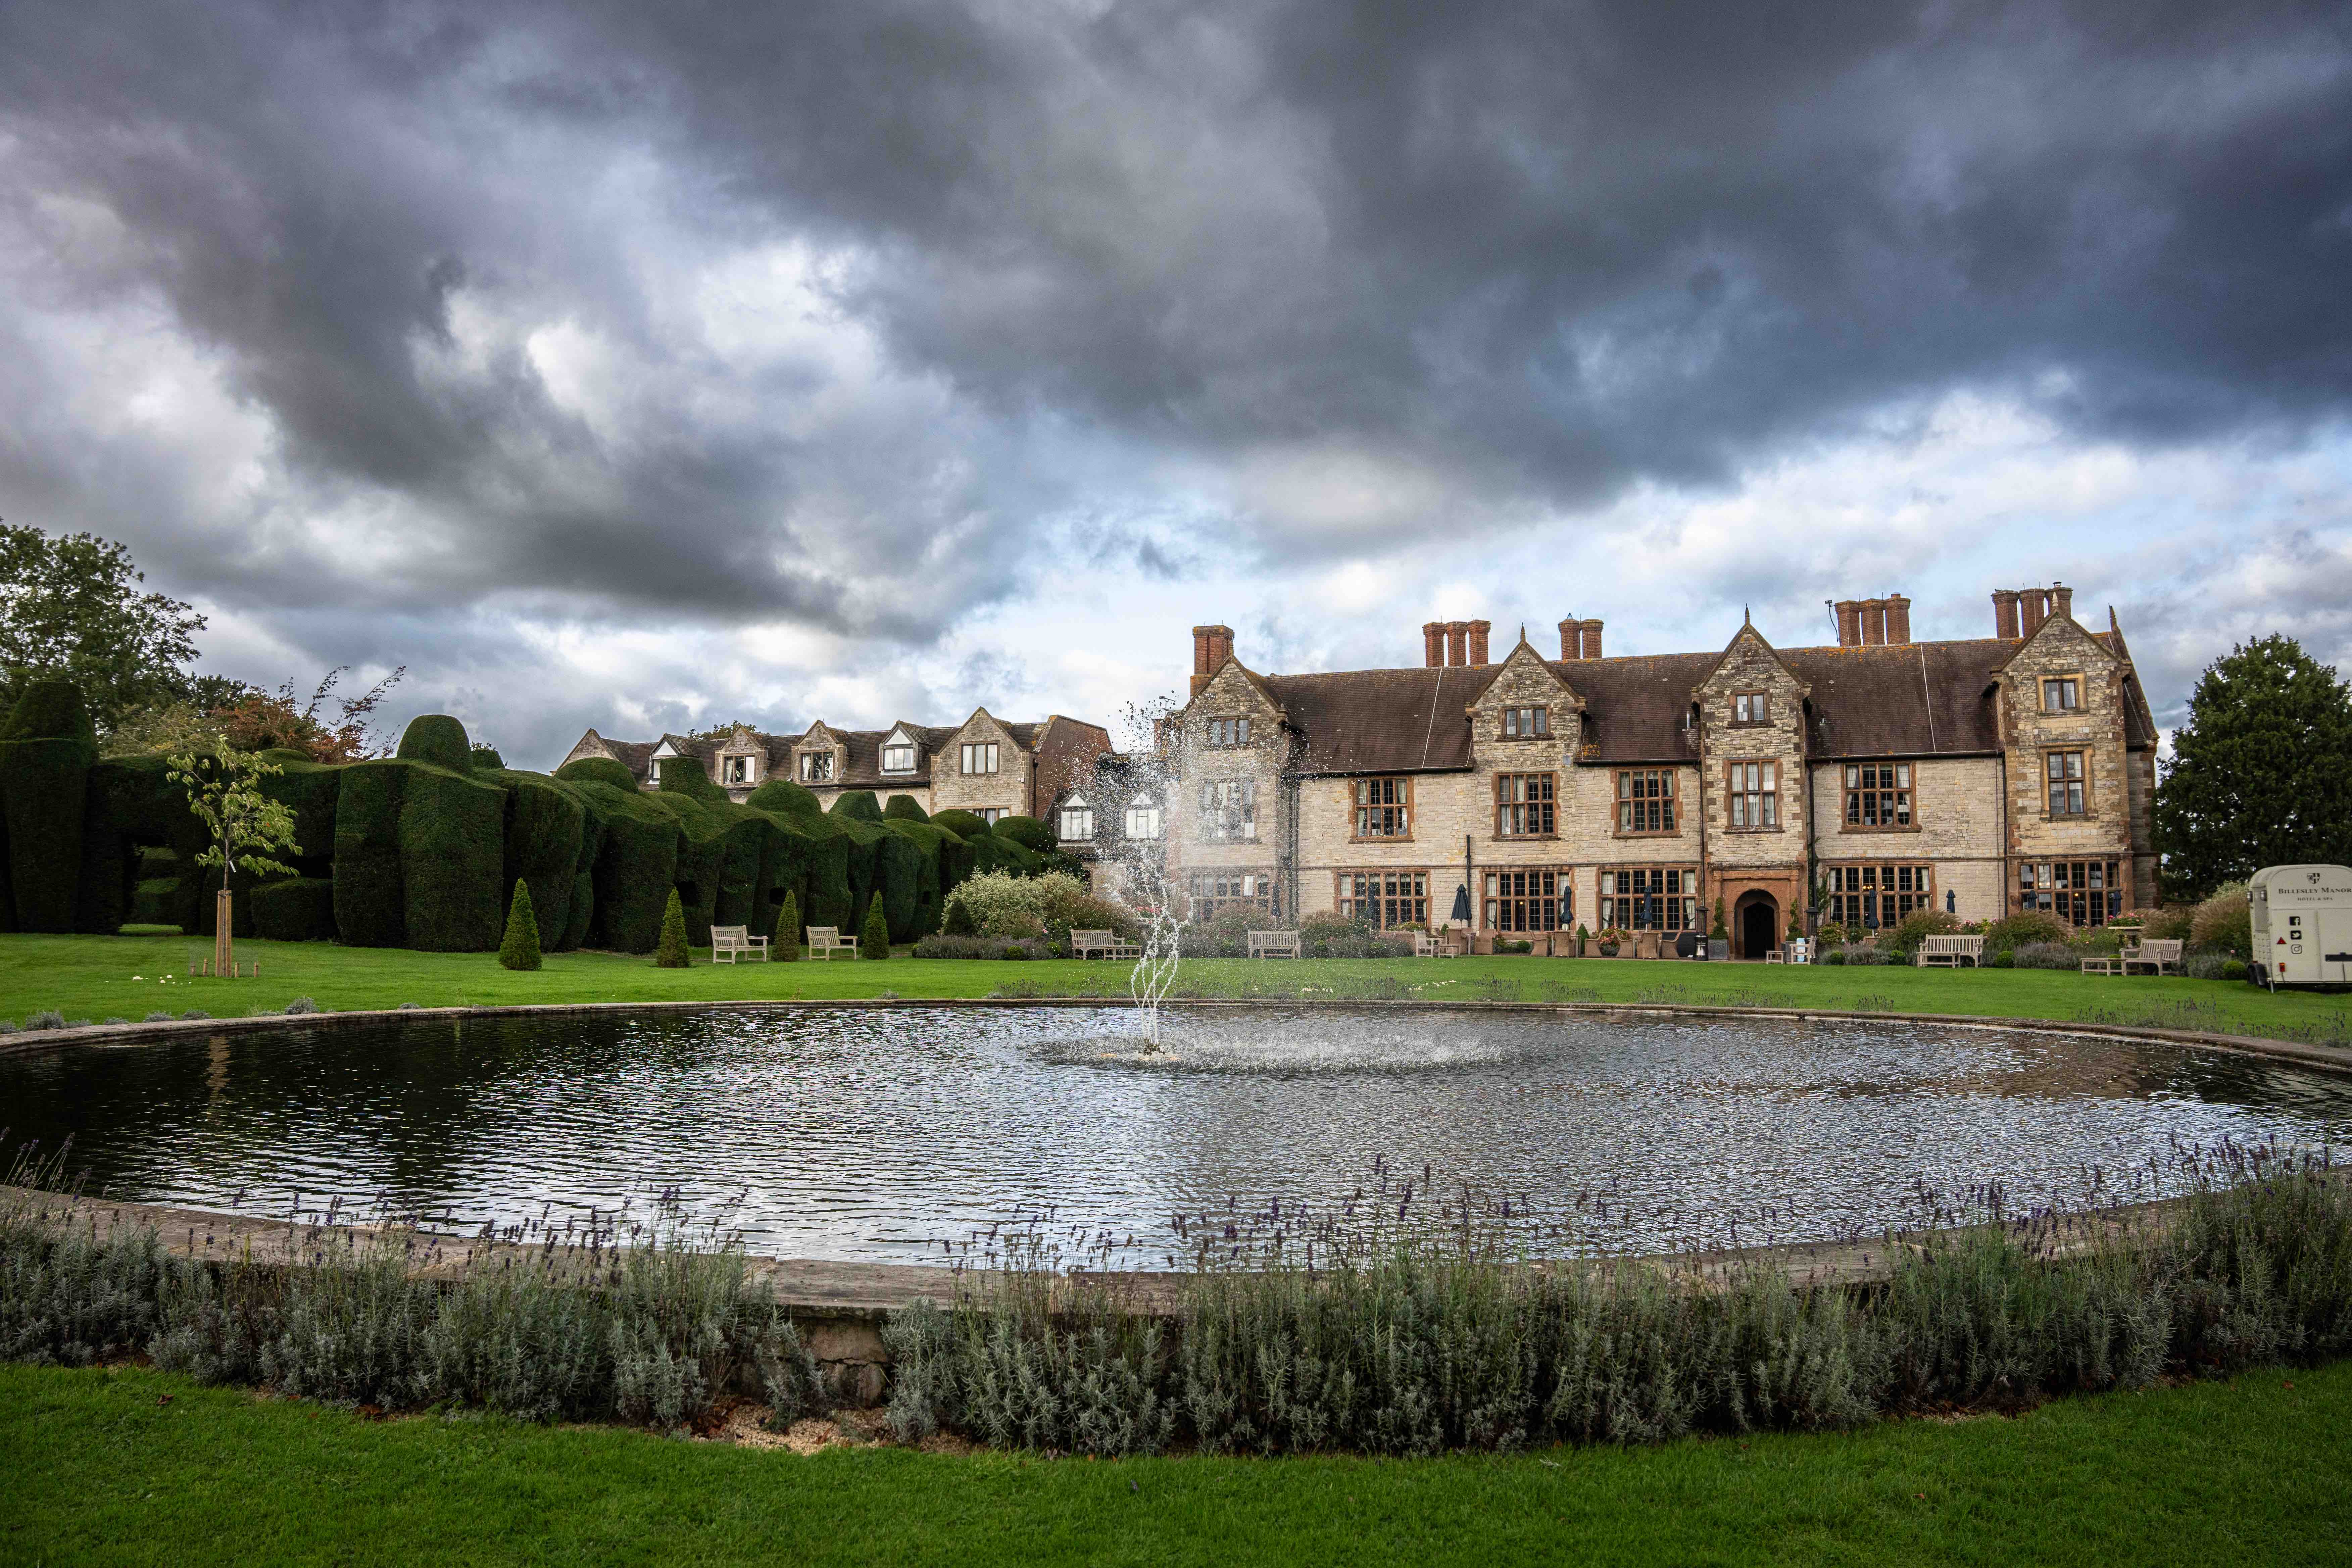 Luxury Warwickshire hotel launches new brailled guide for visually impaired guests